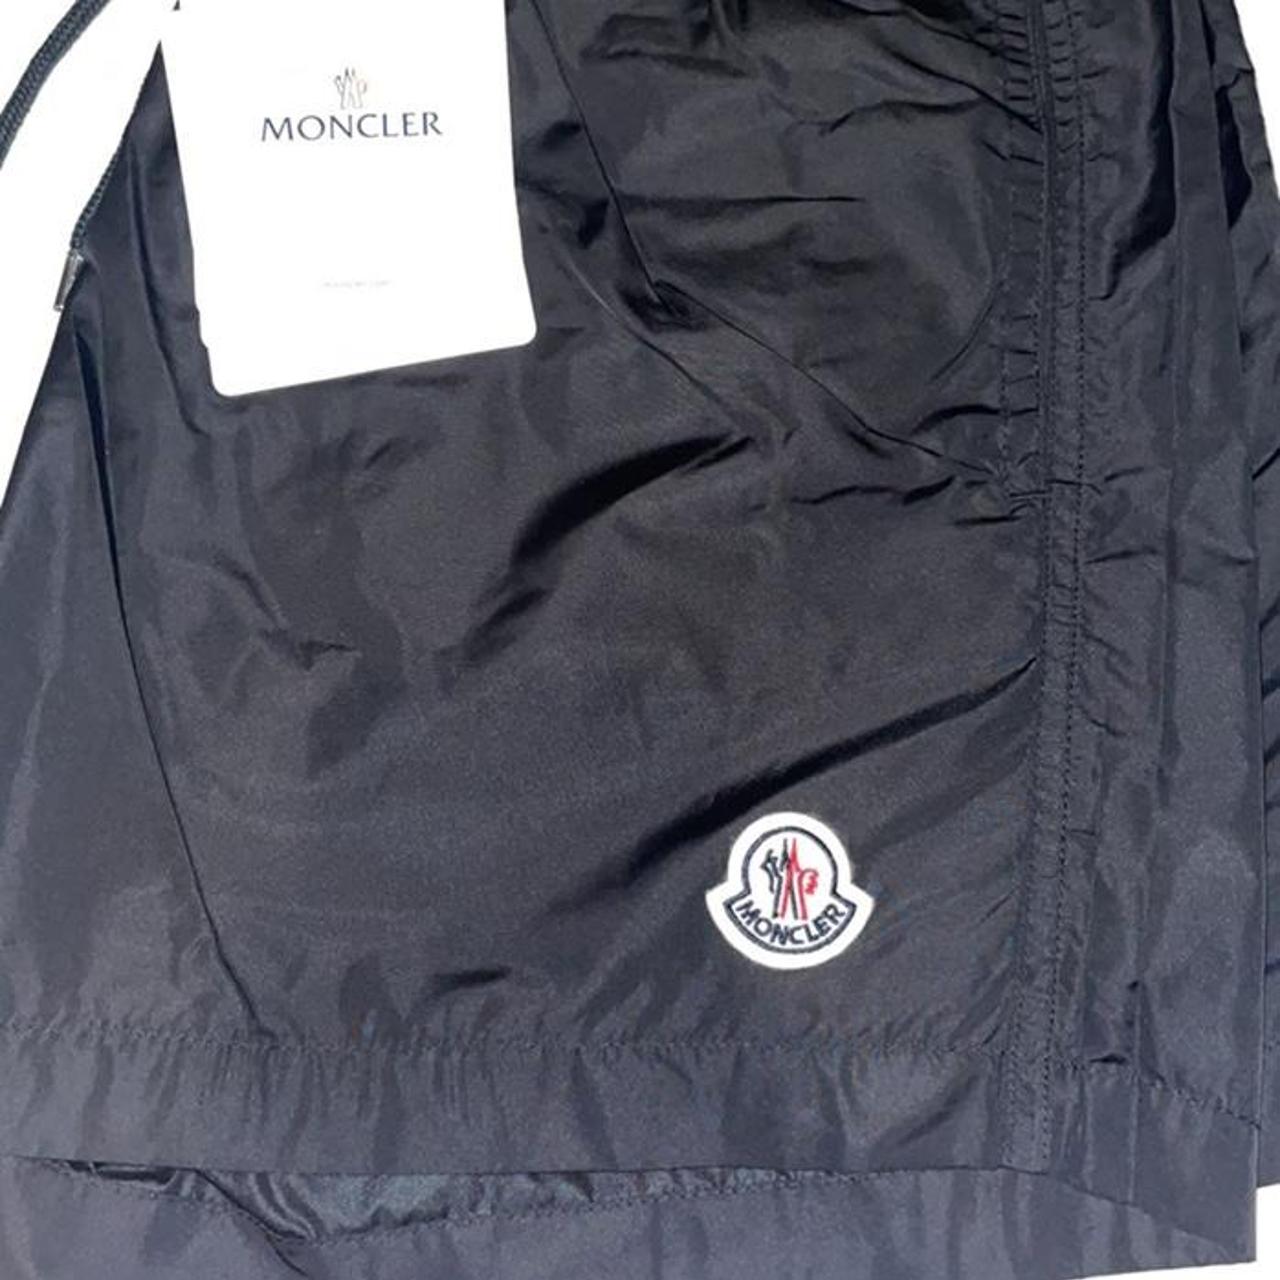 Brand new Moncler swim shorts with tags, only... - Depop